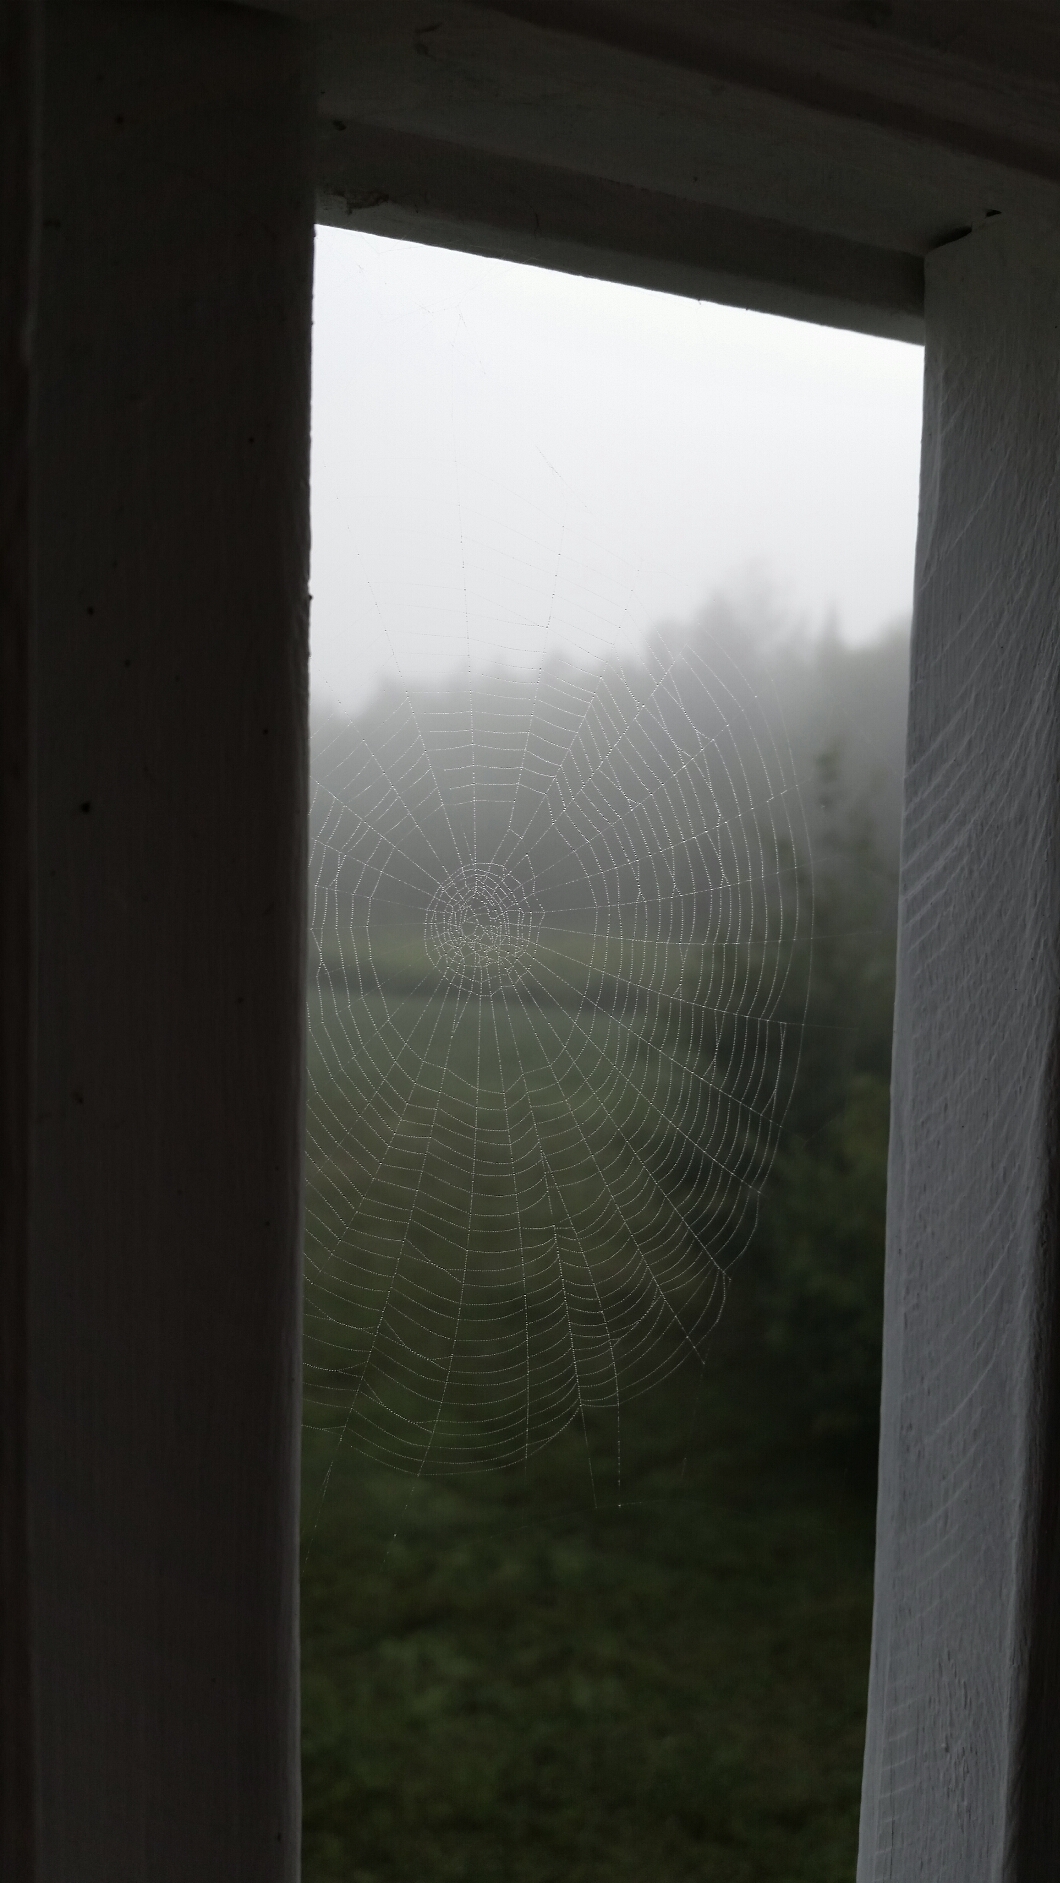 Spiderweb and foggy morning